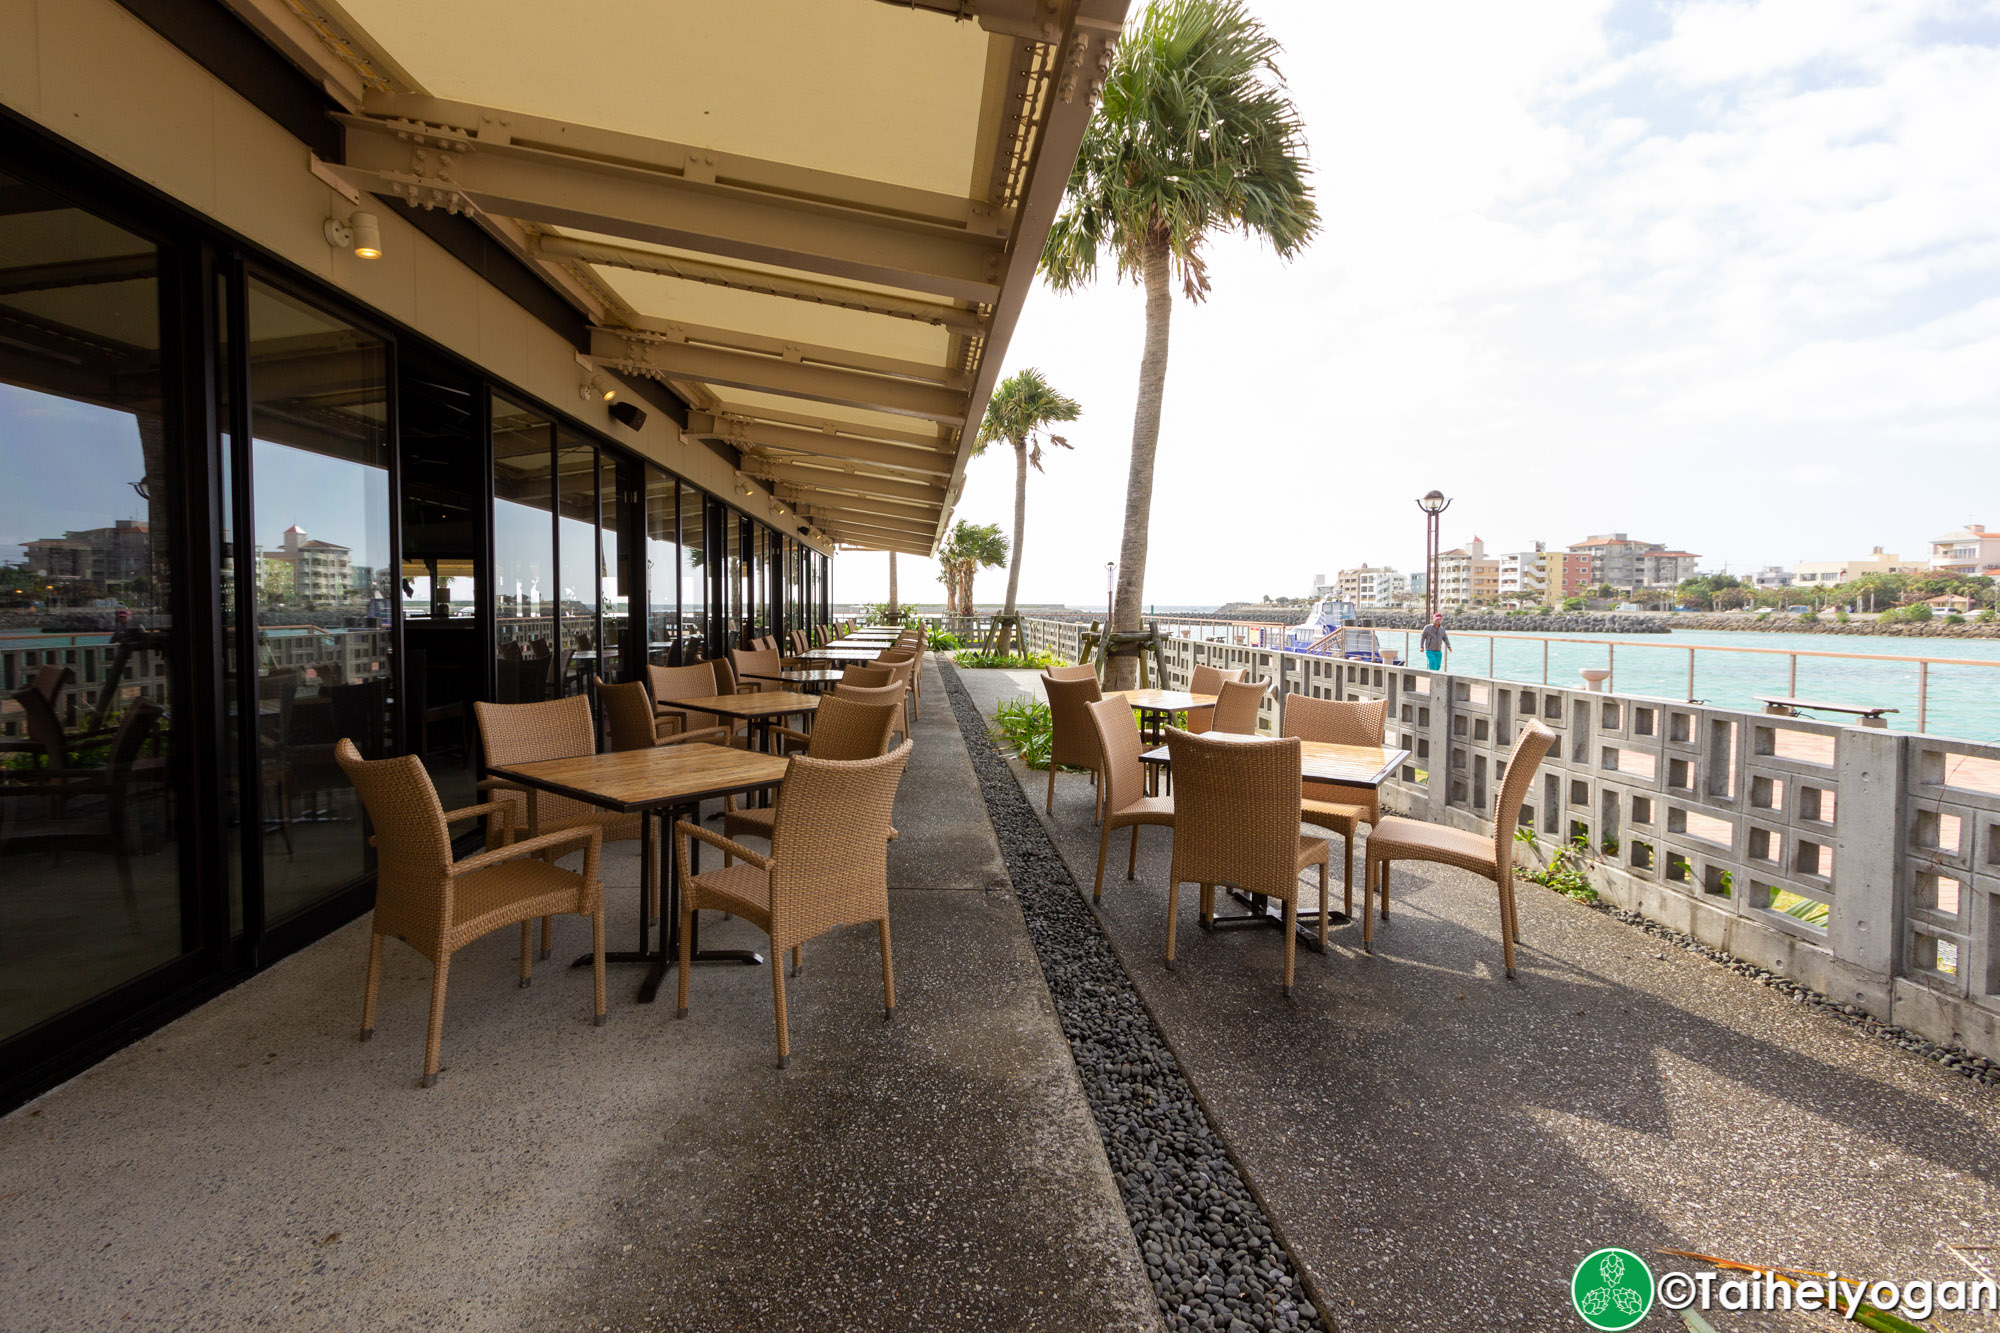 Chatan Harbor Brewery - Outdoor Terrace Seating